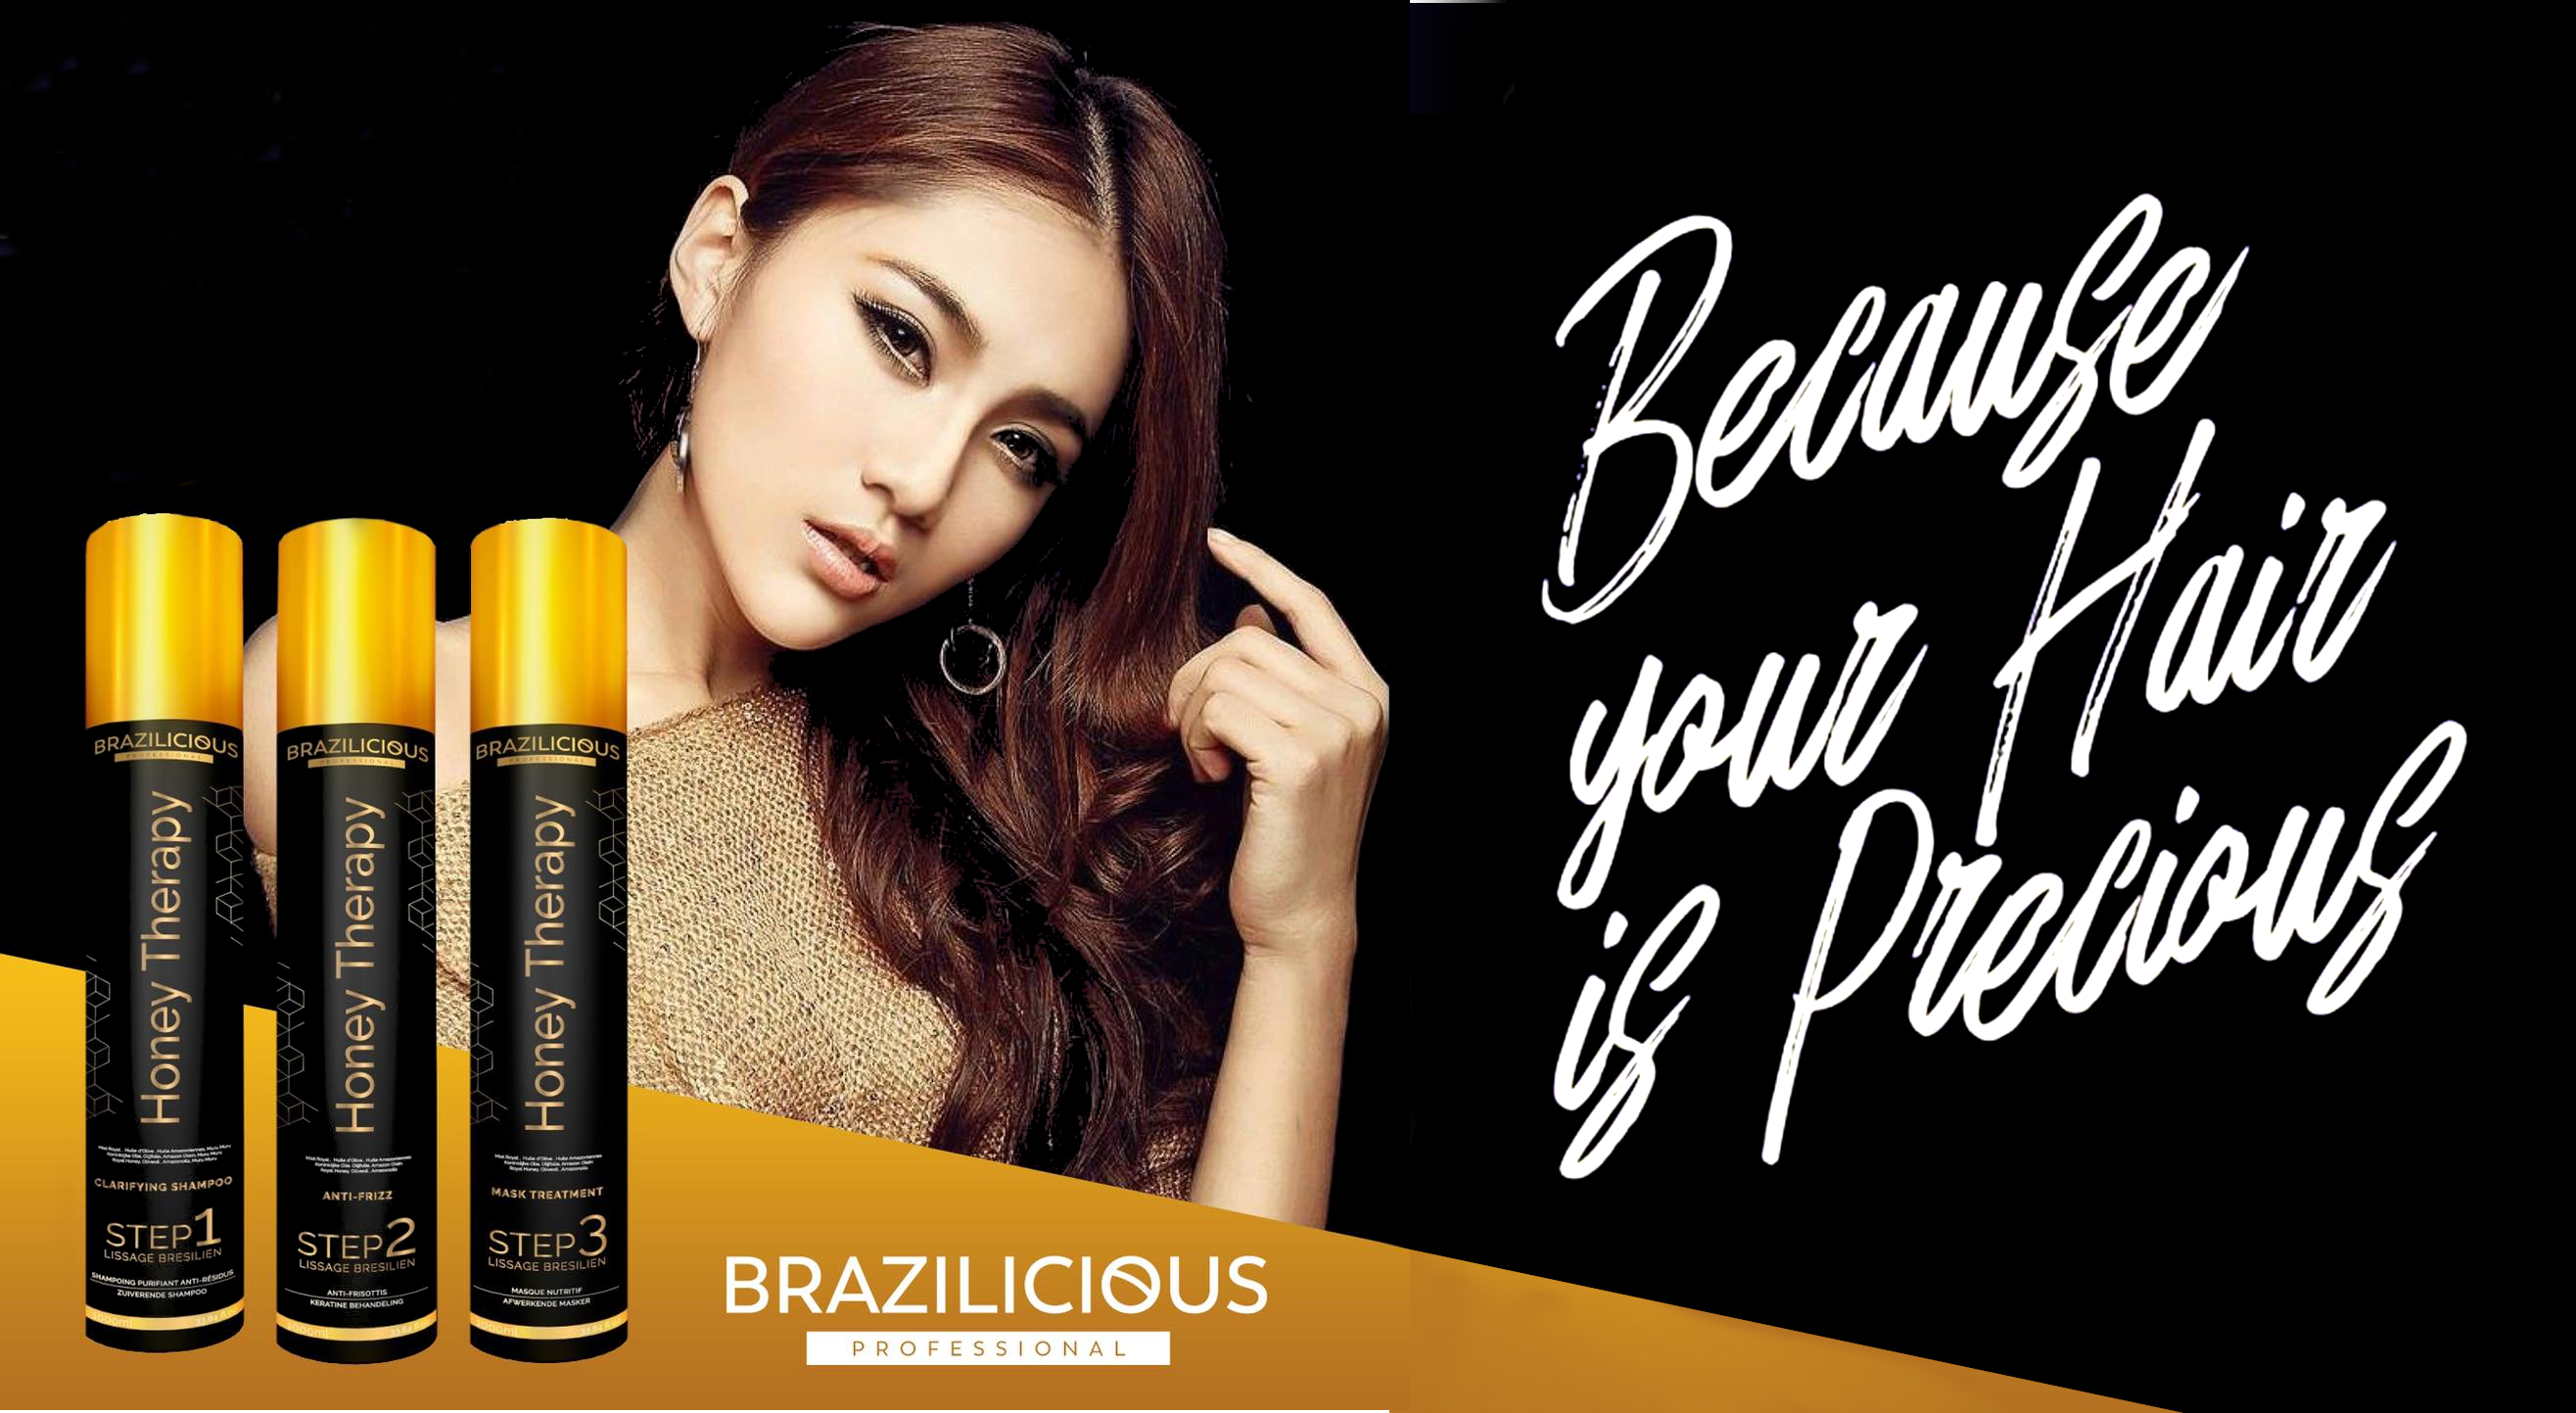 Delicious and all the way from Brazil, Brazilicious ! Έφτασαν στην Angelopoulos Hair & Beauty